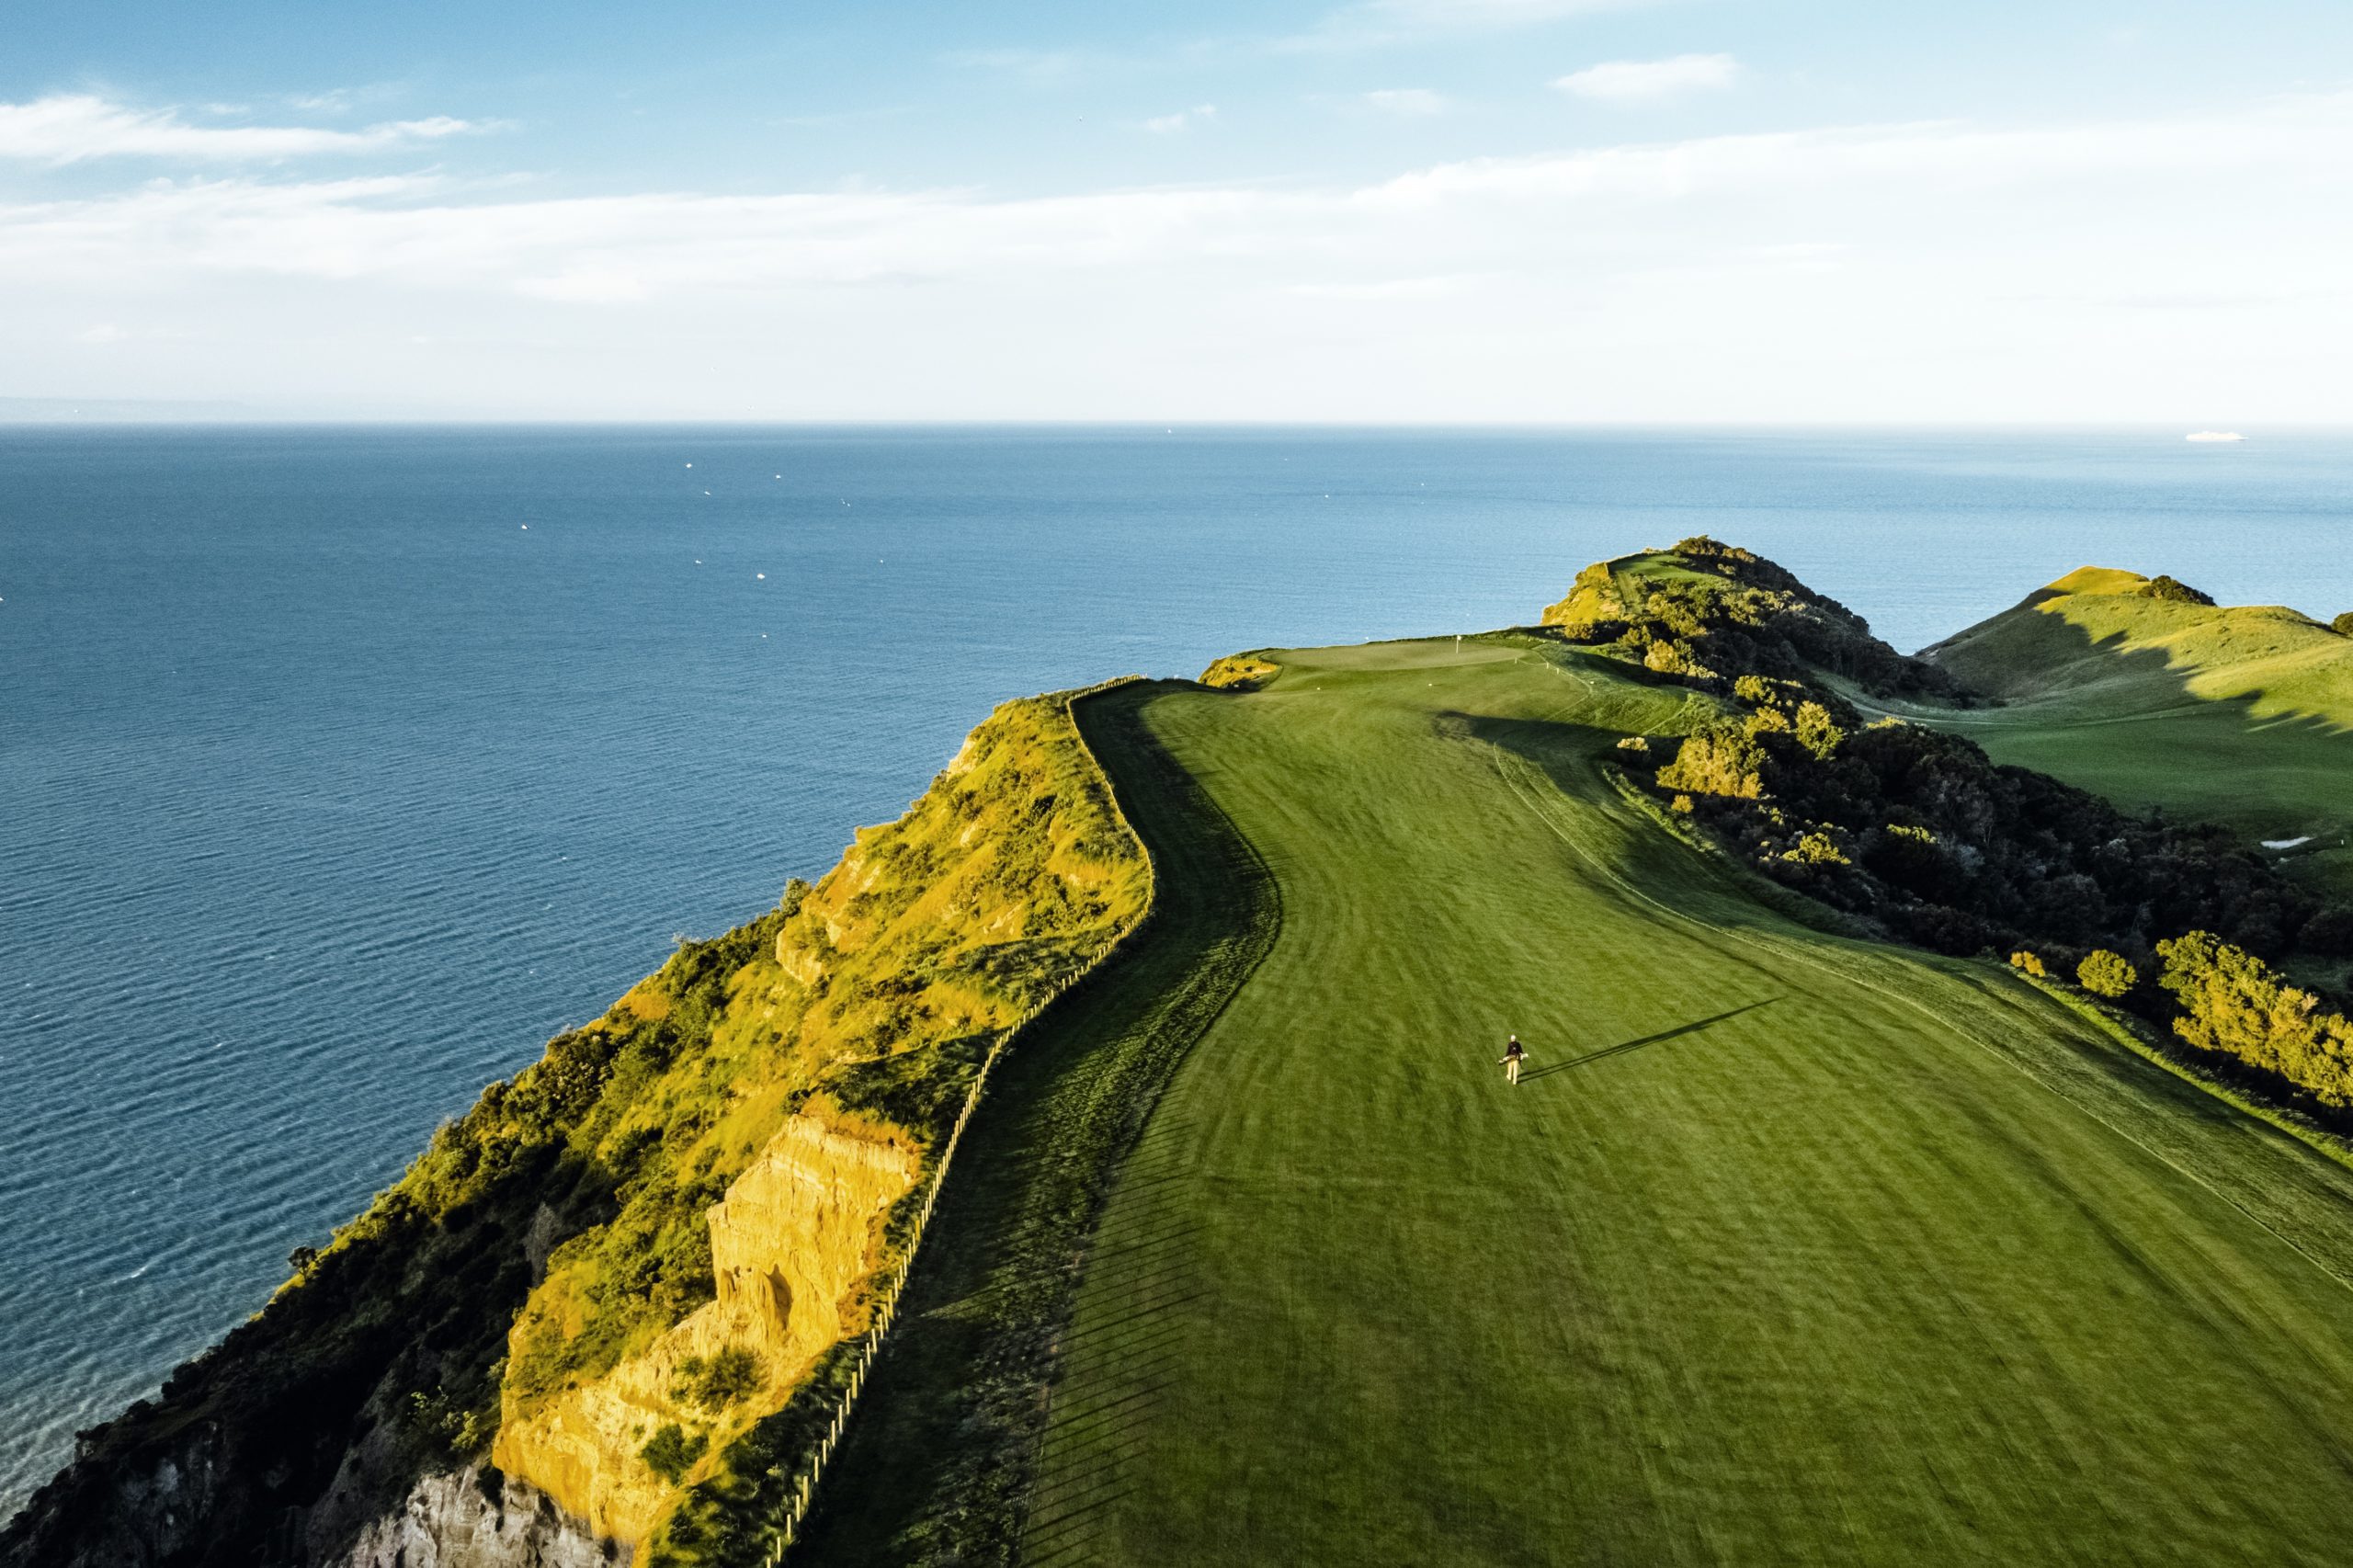 Golf course at Cape Kidnappers on the edge of a cliff